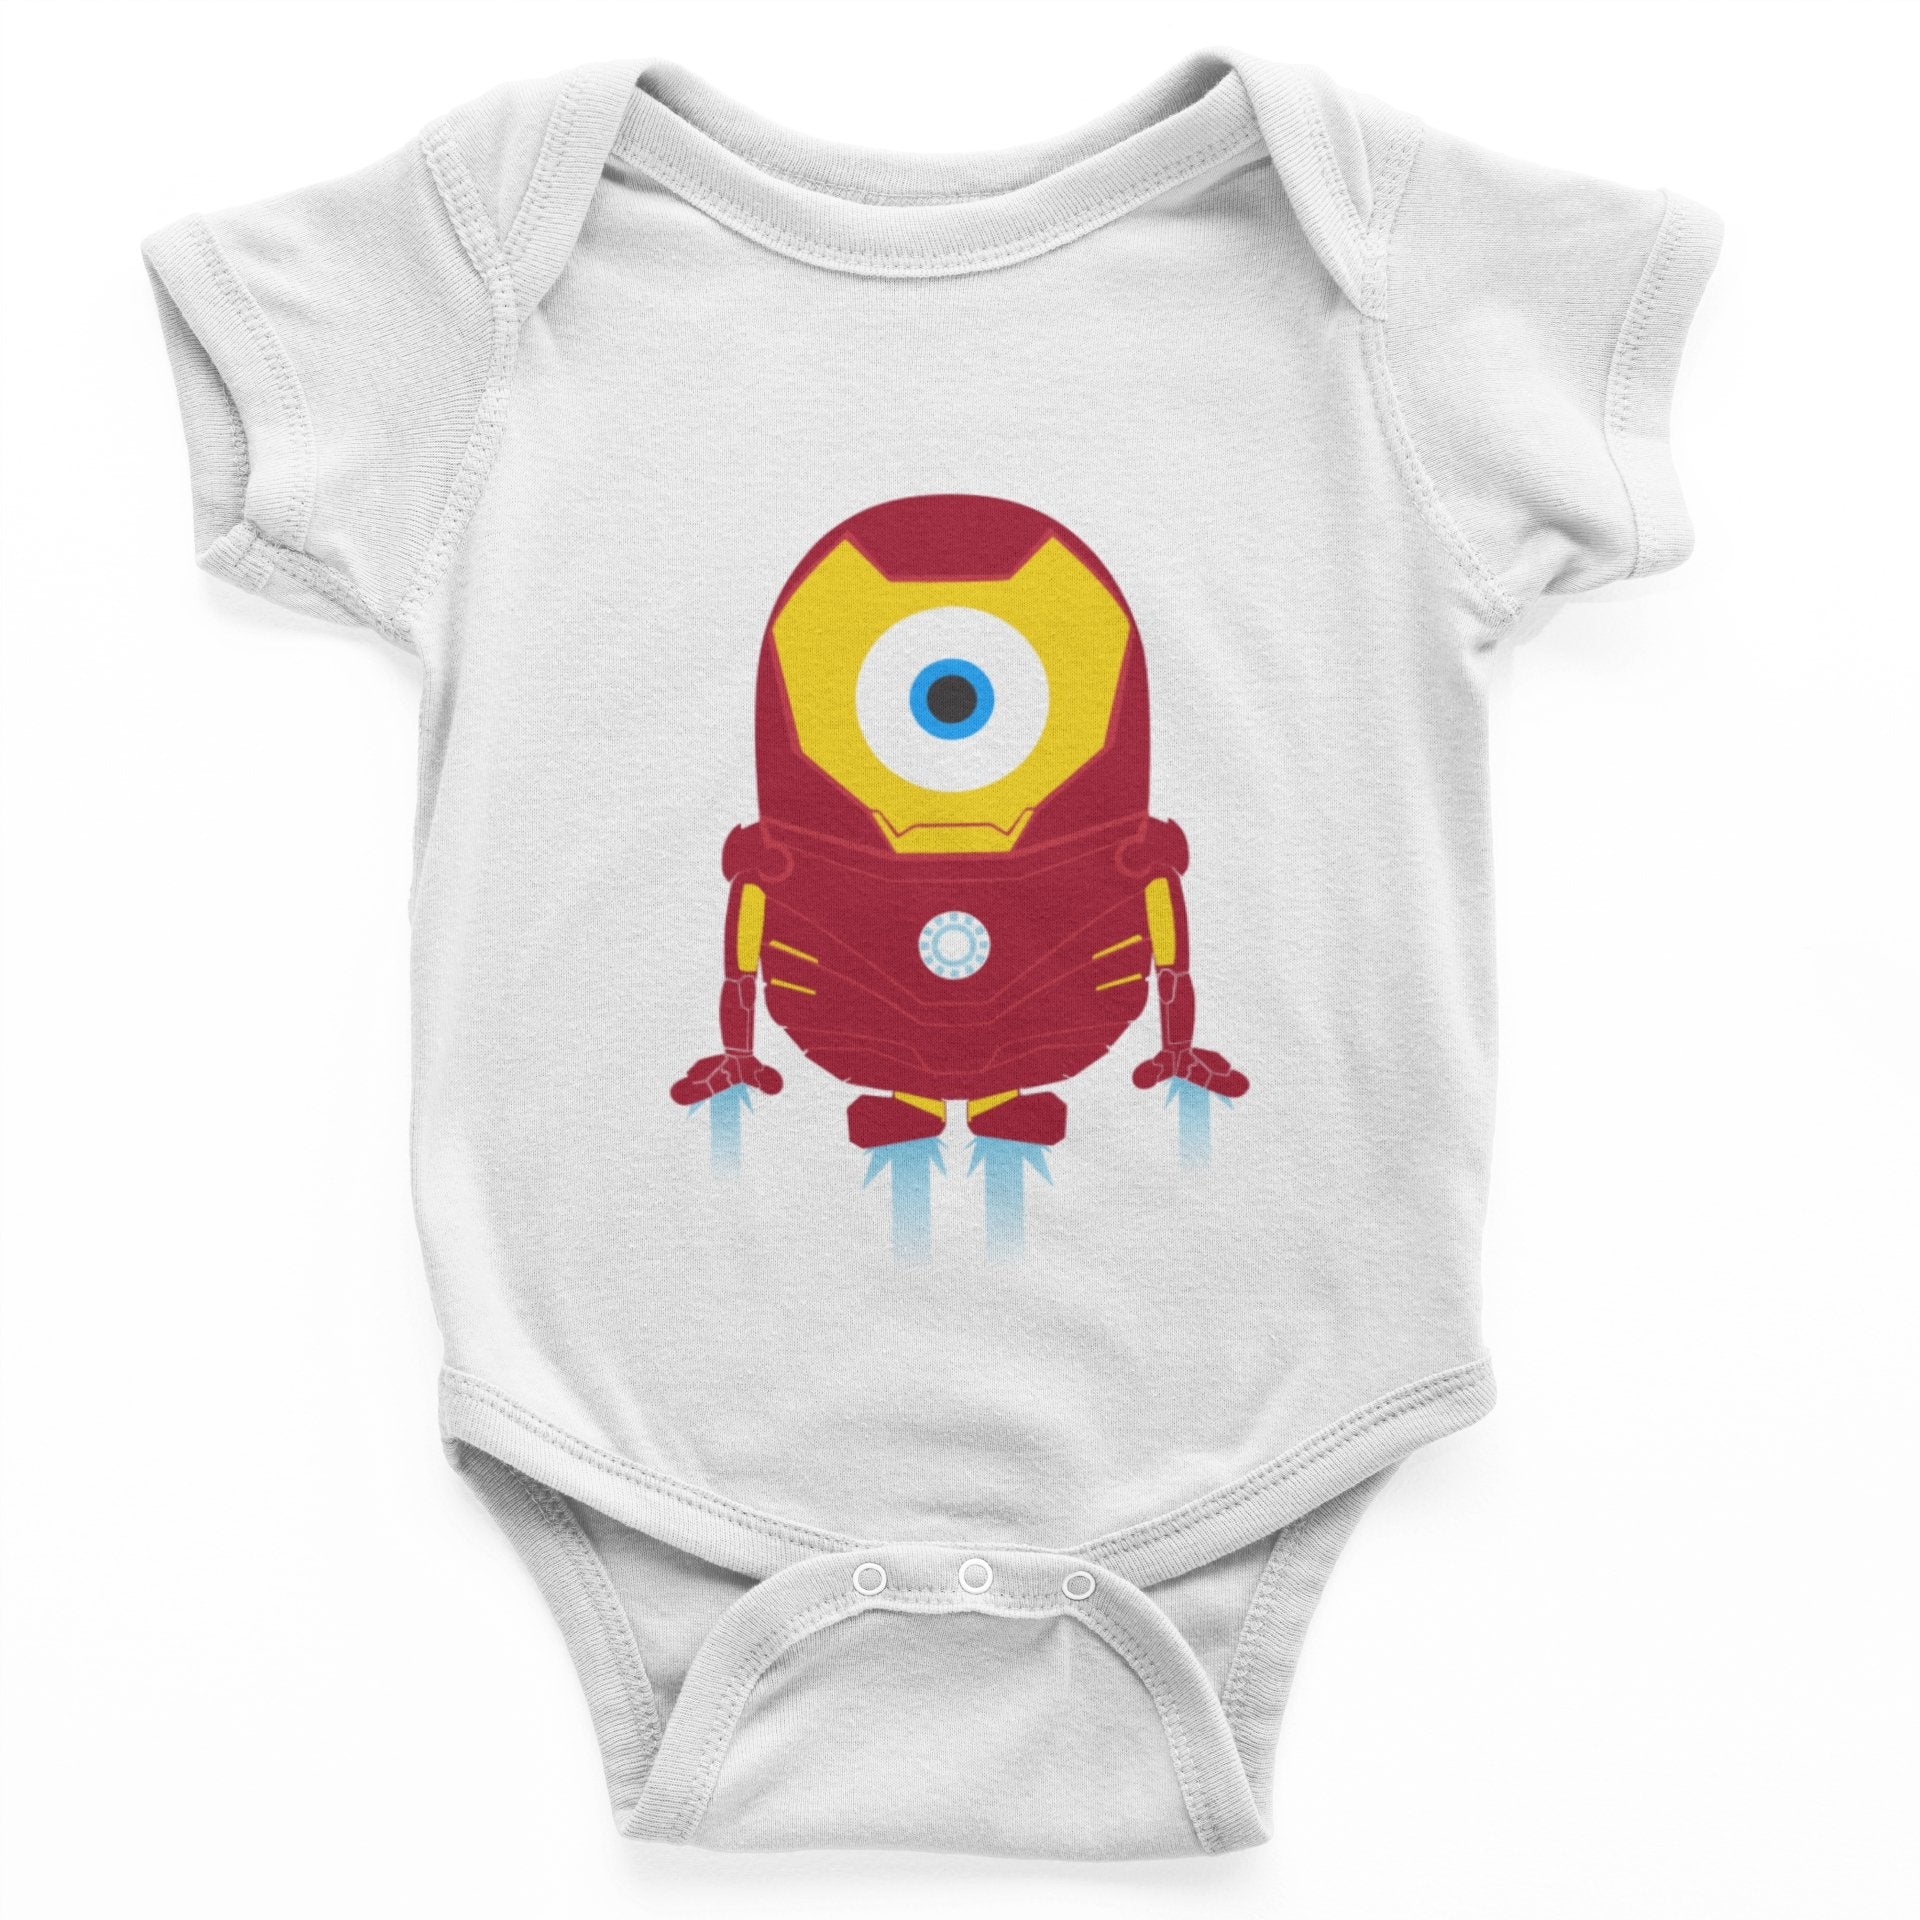 thelegalgang,Iron Man Graphic Onesies for Babies,.